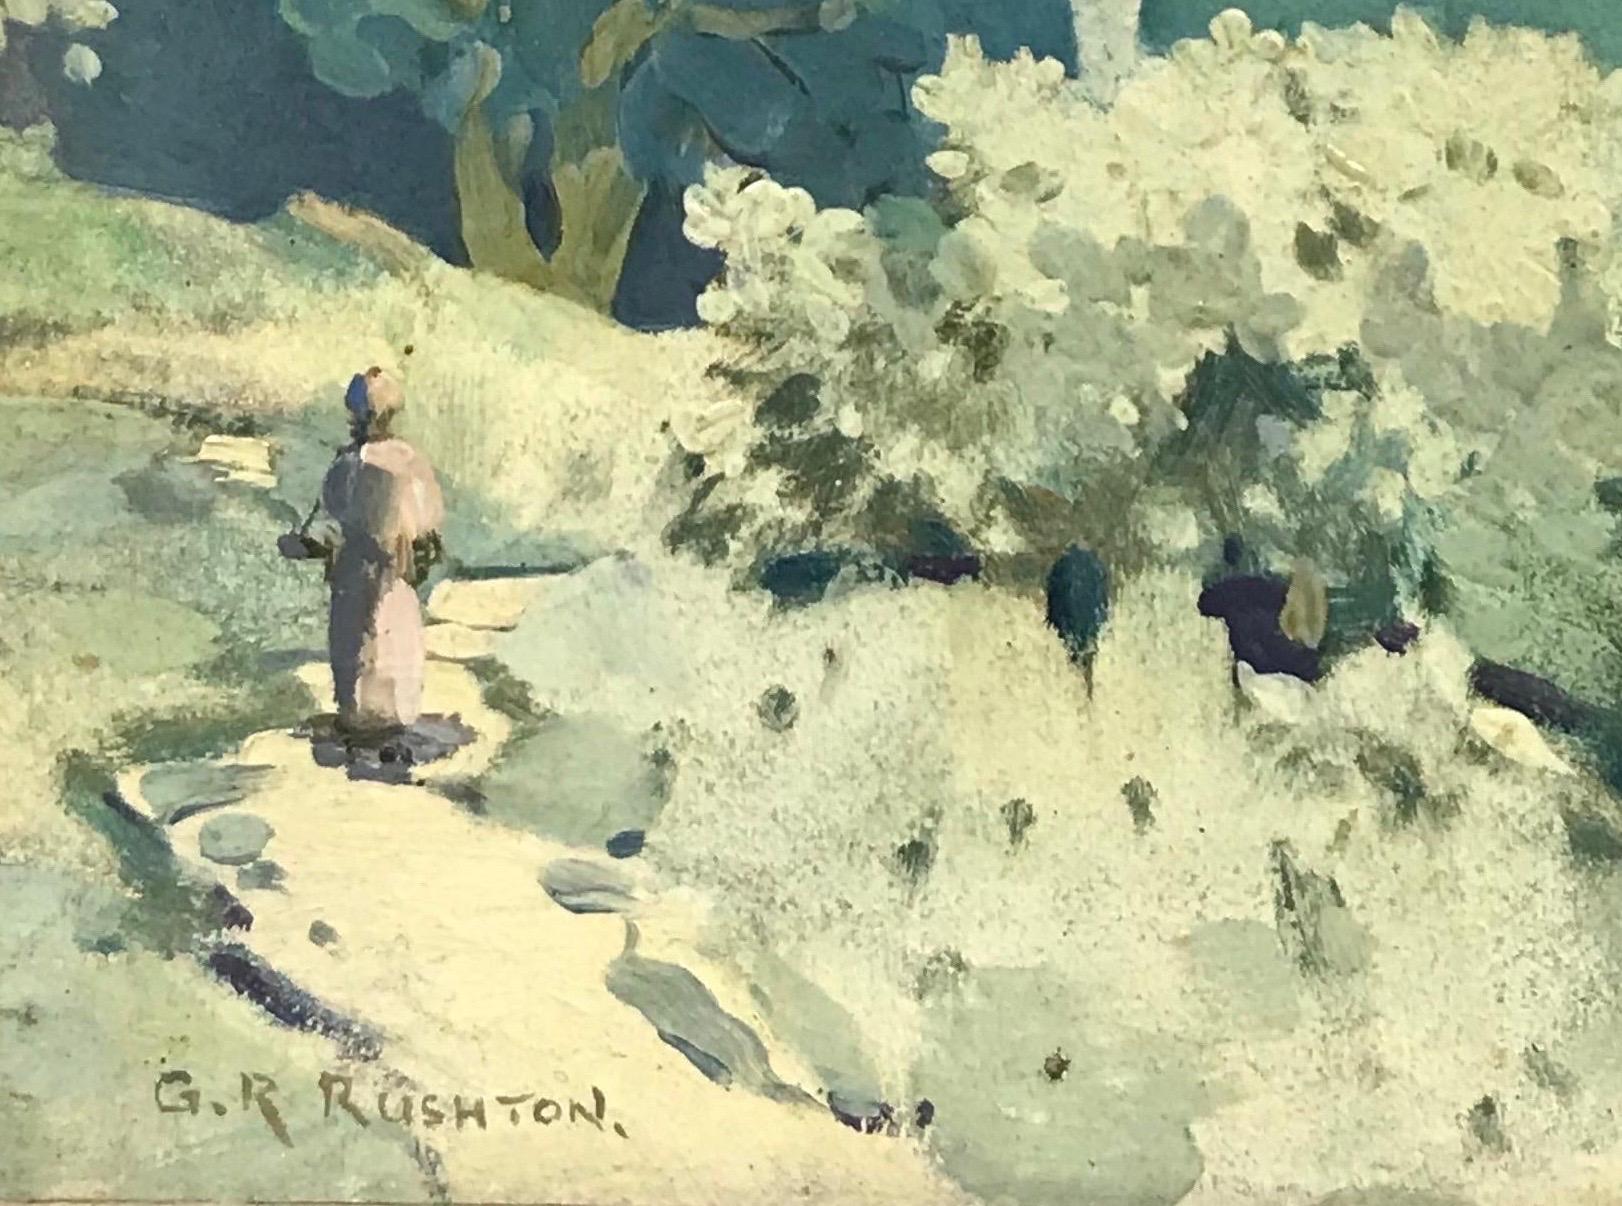 Artist/ School: George Robert Rushton (British 1869-1948), signed lower left

Title: Figure Walking in Continental Landscape

Medium: oil on board, framed

Framed: 14 x 18 inches
Board: 11 x 15 inches

Provenance: private collection,